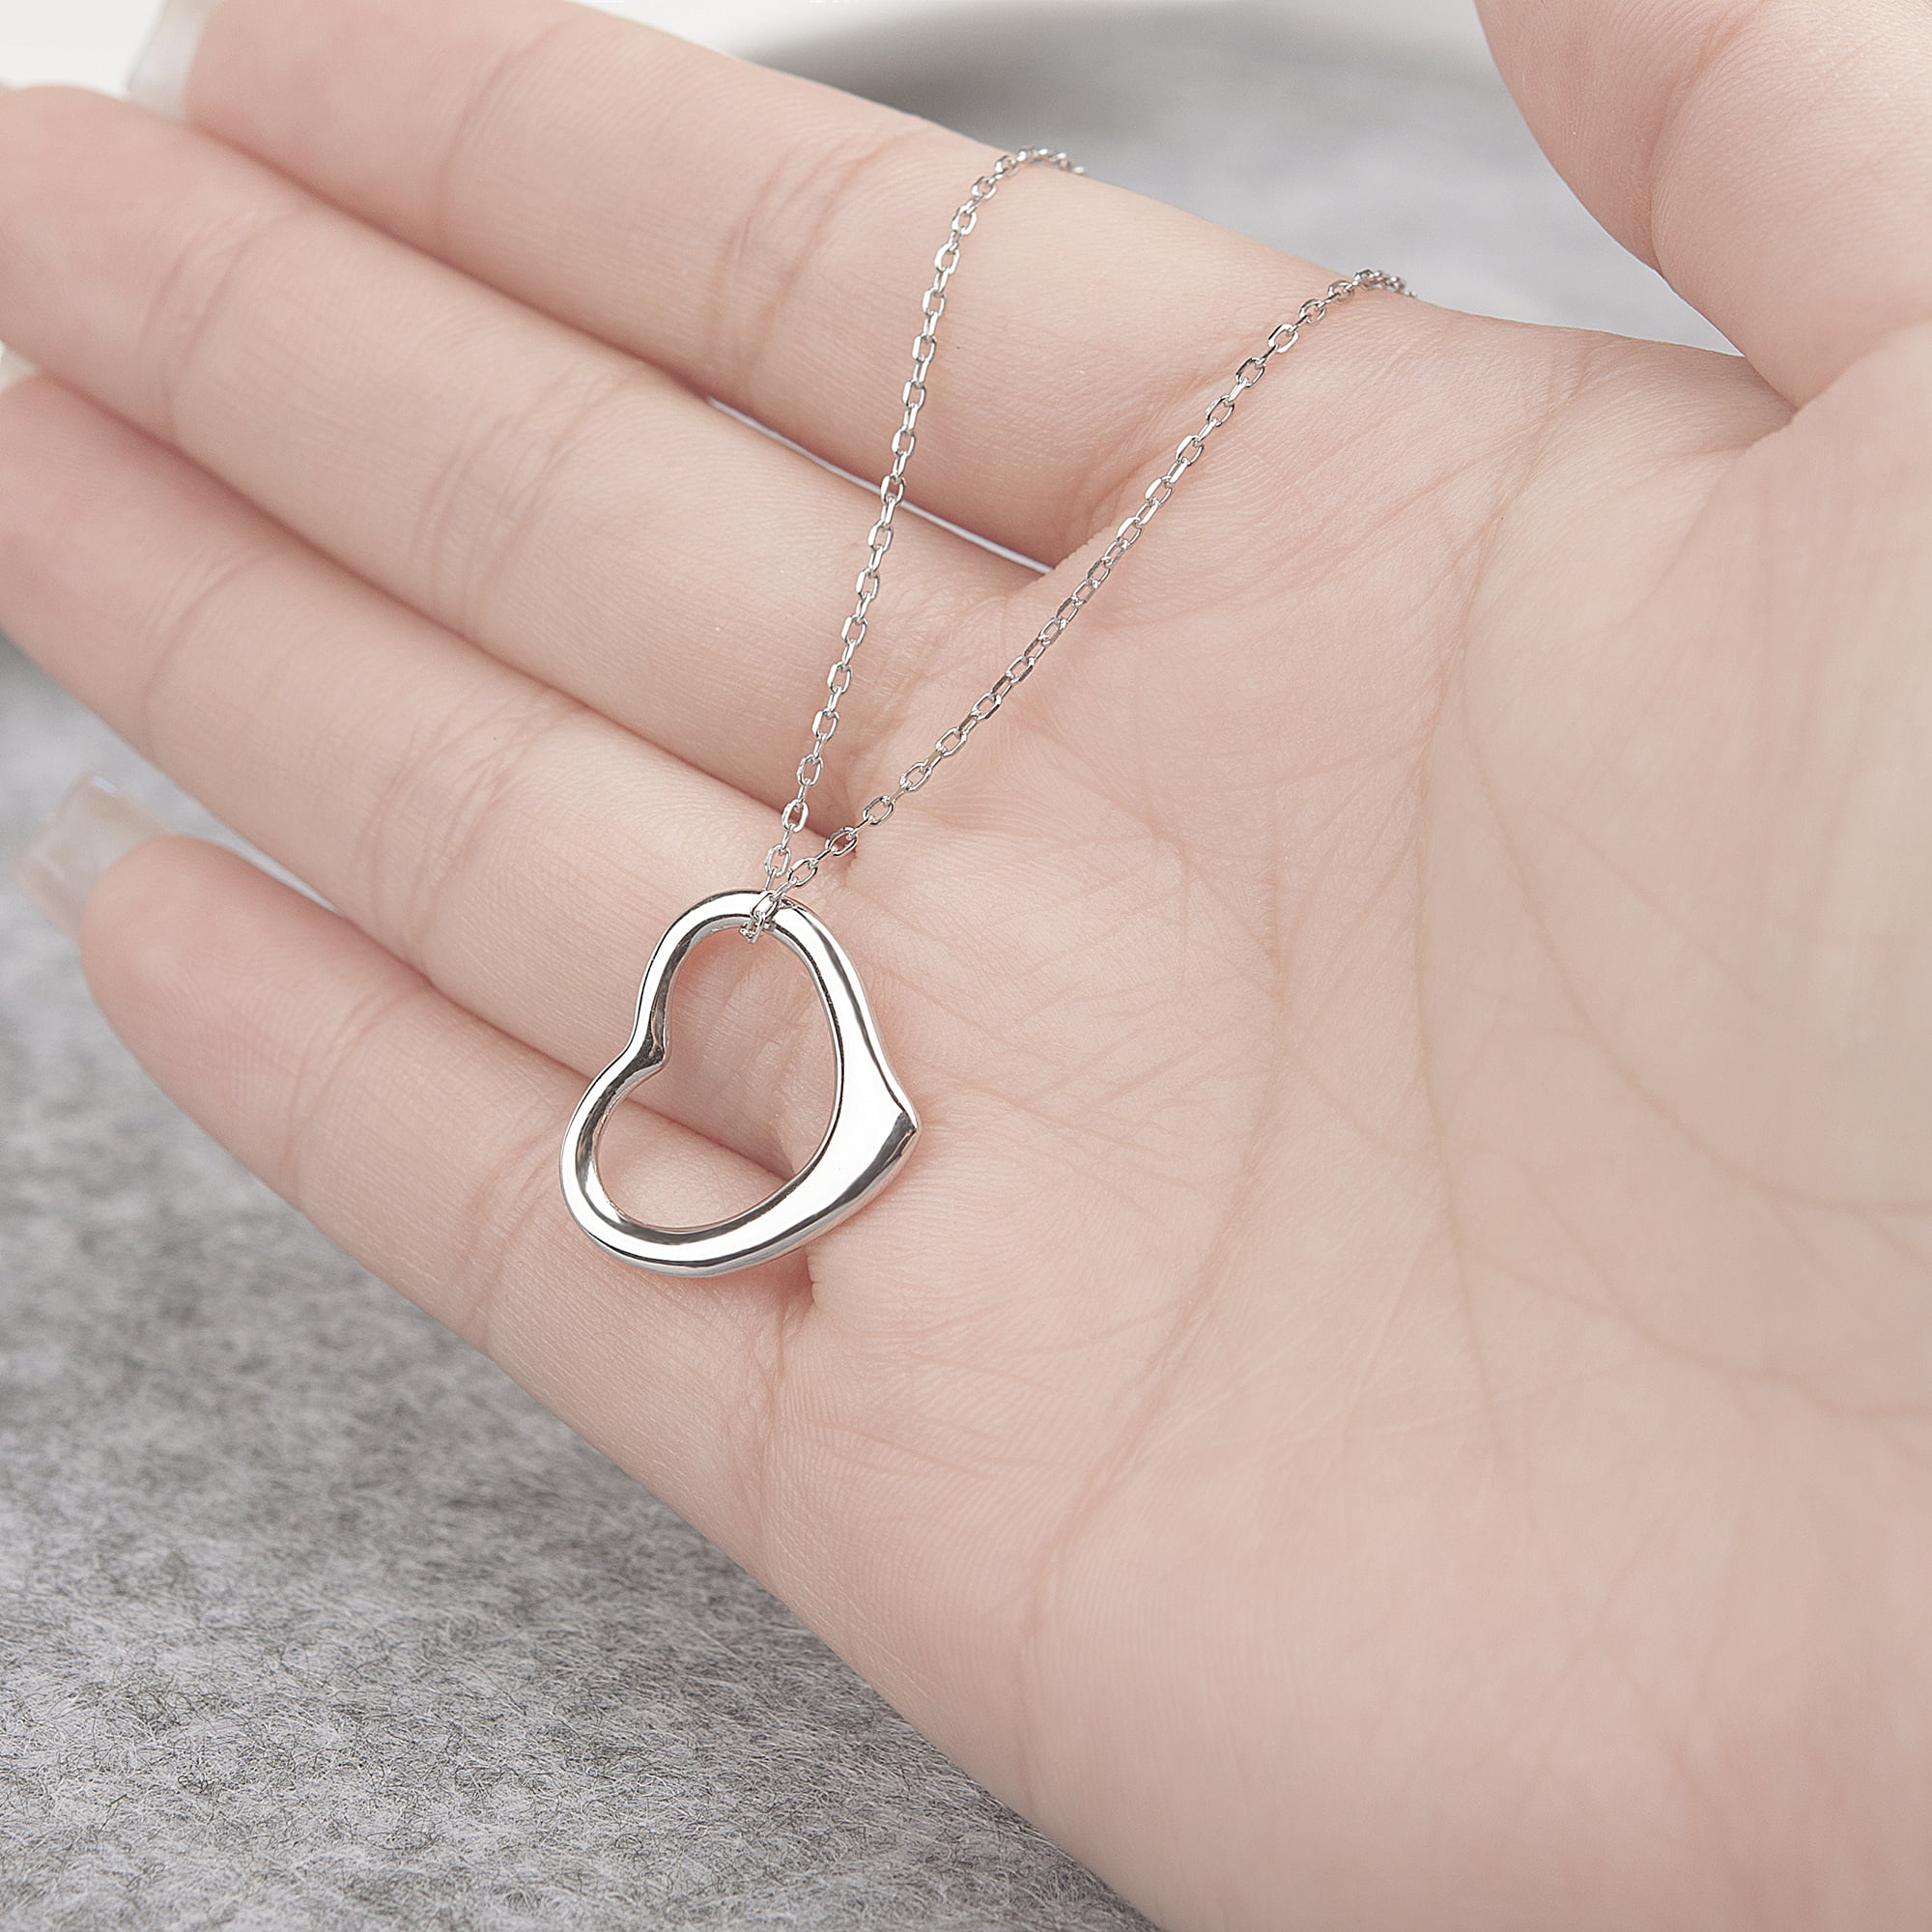 Buy Heart Necklace Gold **I Love You Gift Box** Necklaces for Women Gifts  for her Girlfriend Wife Romantic Gifts Ideas with Zirconia gem Stone Pendant  Jewellery Set Silver 925 Plated Online at